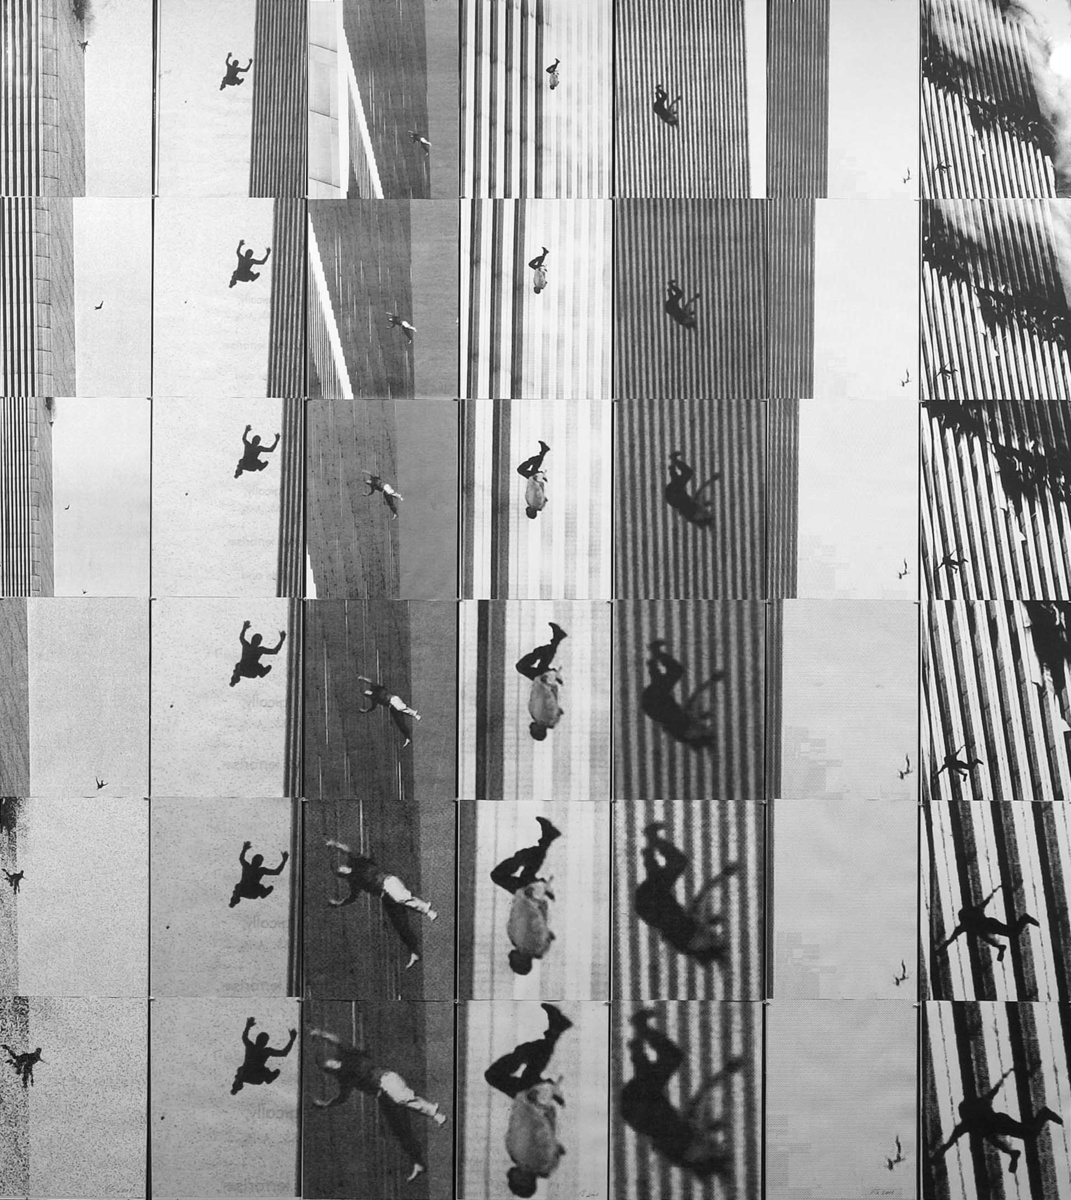 6x6 collage; 6 different images of silhouettes of a person jumping off a building, getting progressively larger 6 times